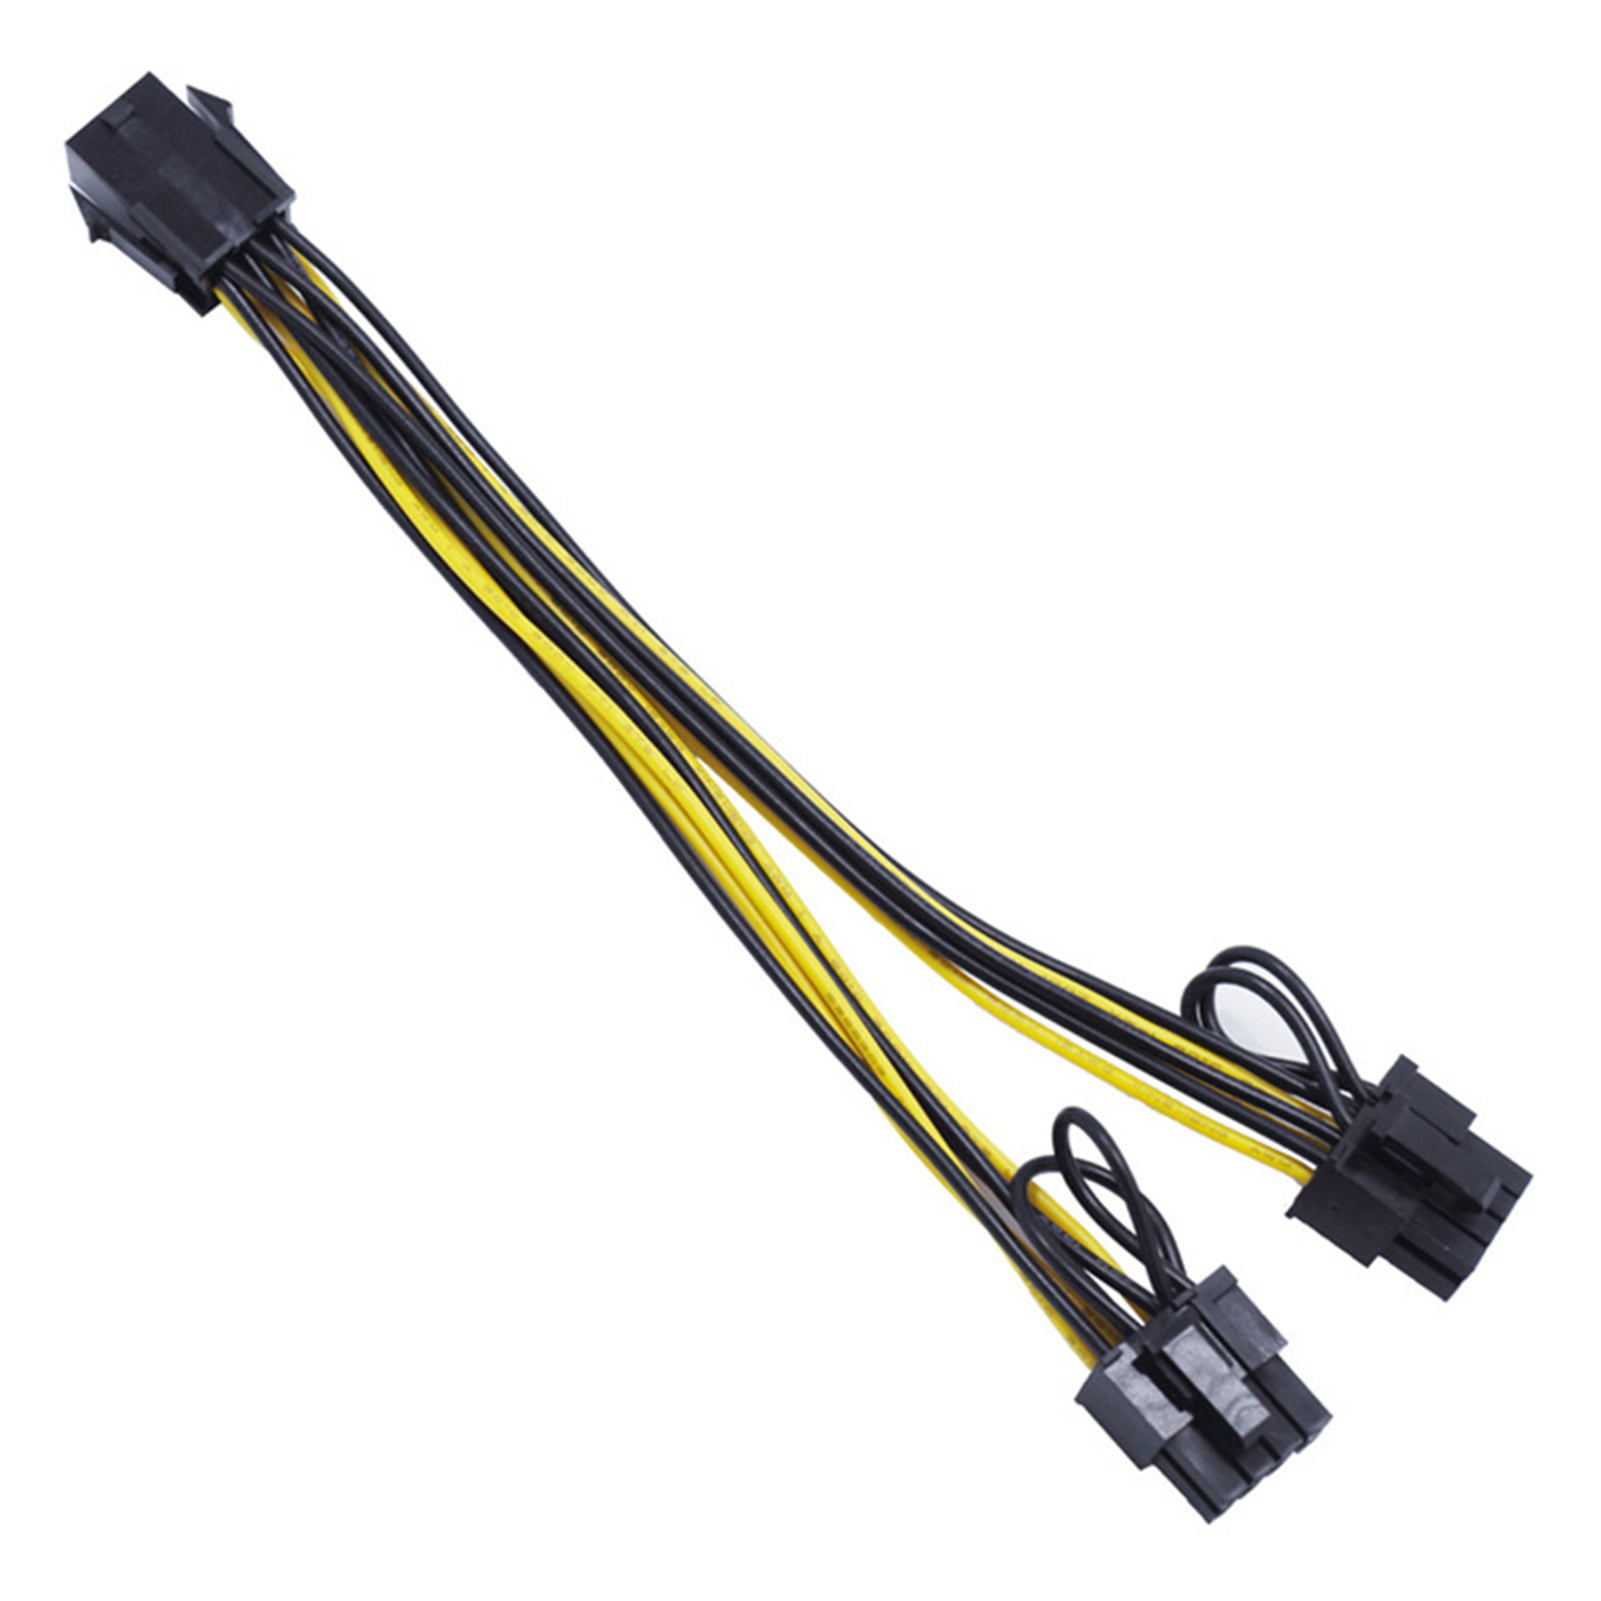 PCI Express to 8-Pin(6+2) Graphics Adapter Cable Cord 22cm Miner Cables - Walmart.com